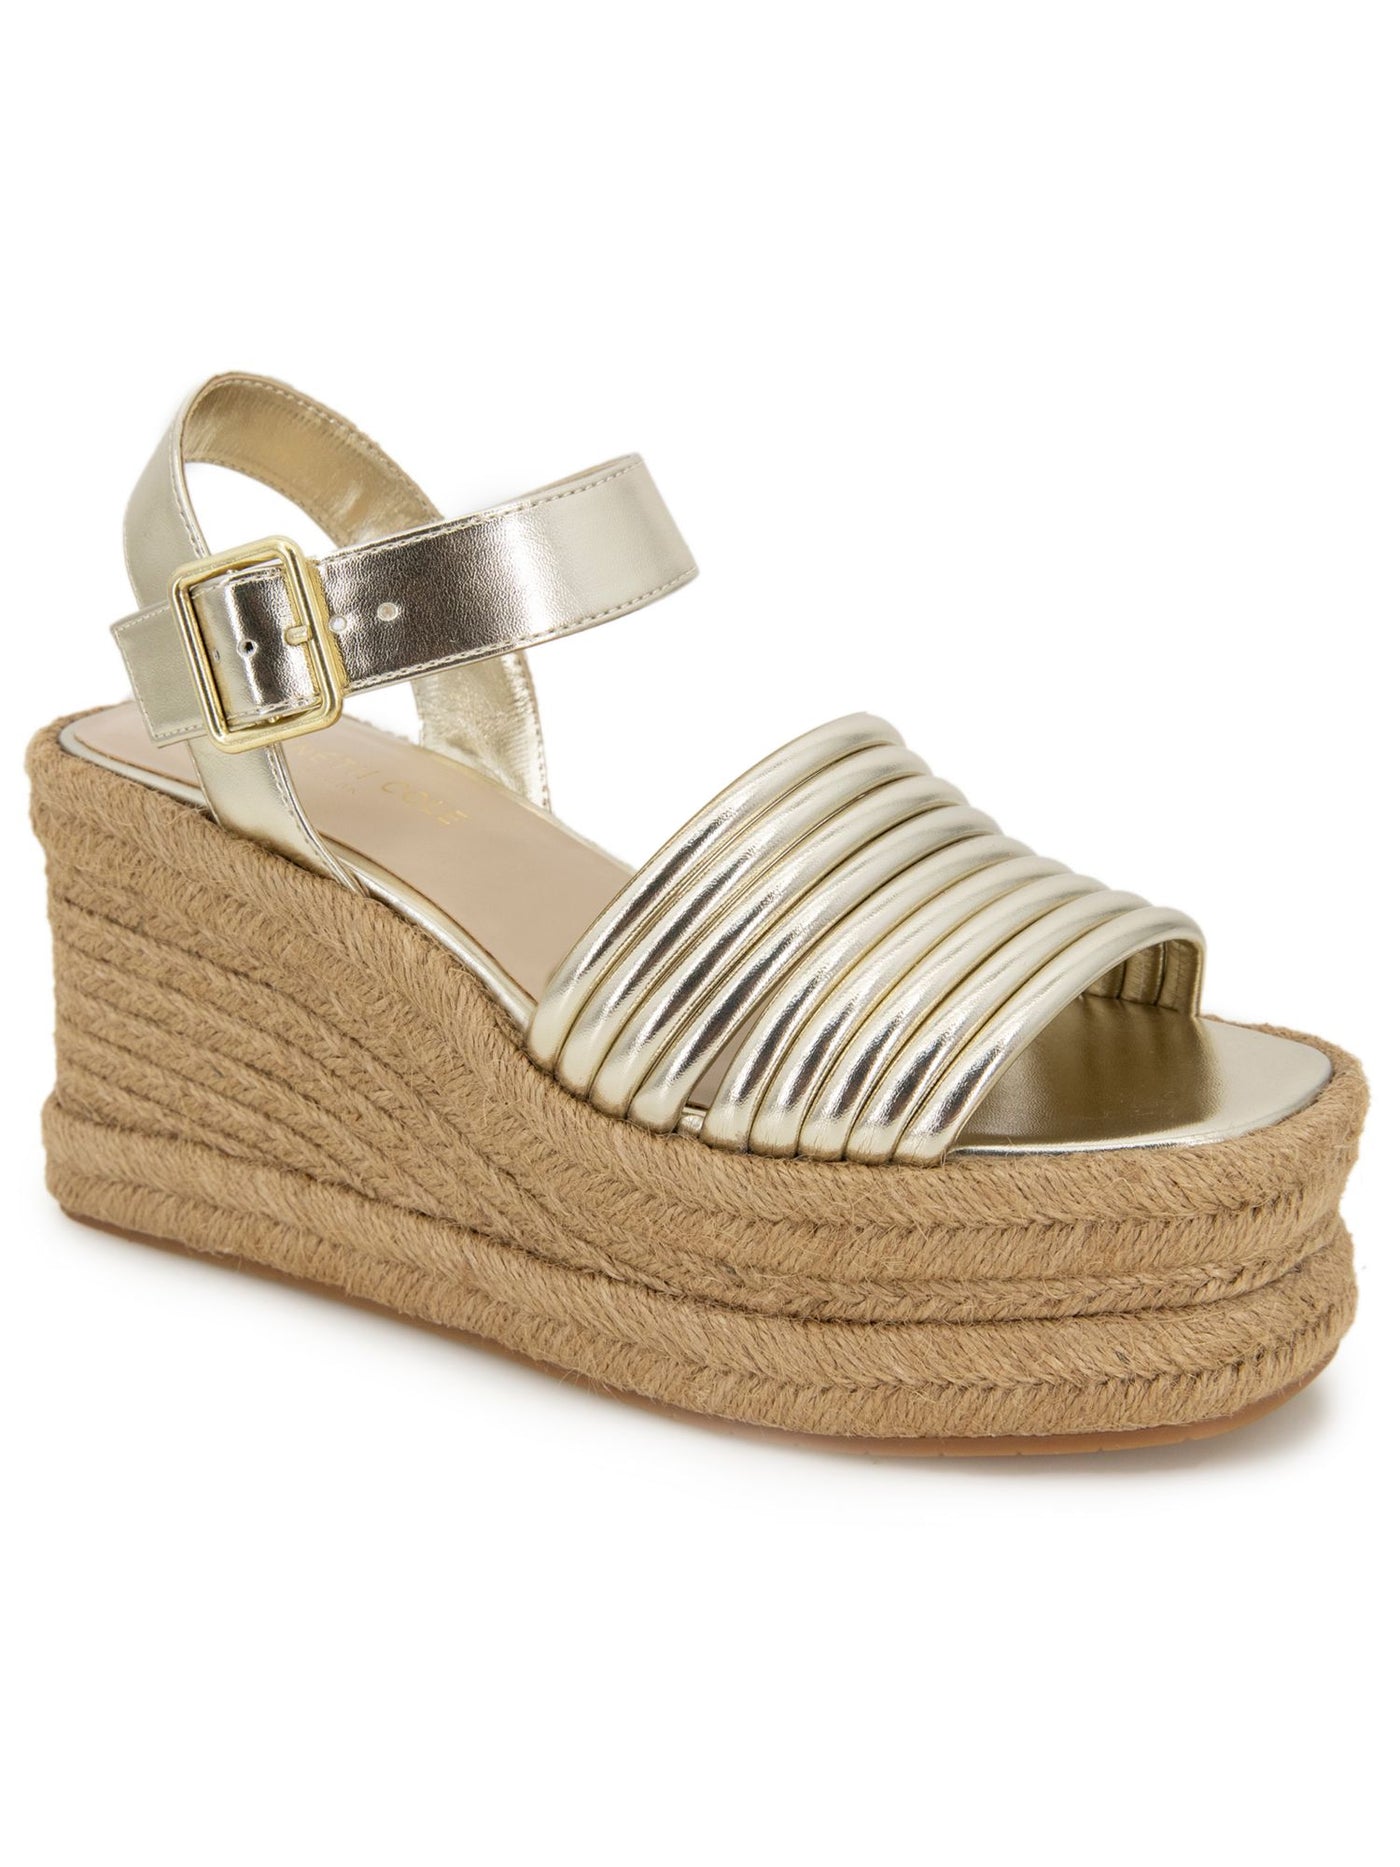 KENNETH COLE NEW YORK Womens Gold 2 Wedge Adjustable Ankle Strap Strappy Padded Shelby Open Toe Wedge Buckle Espadrille Shoes 10 M